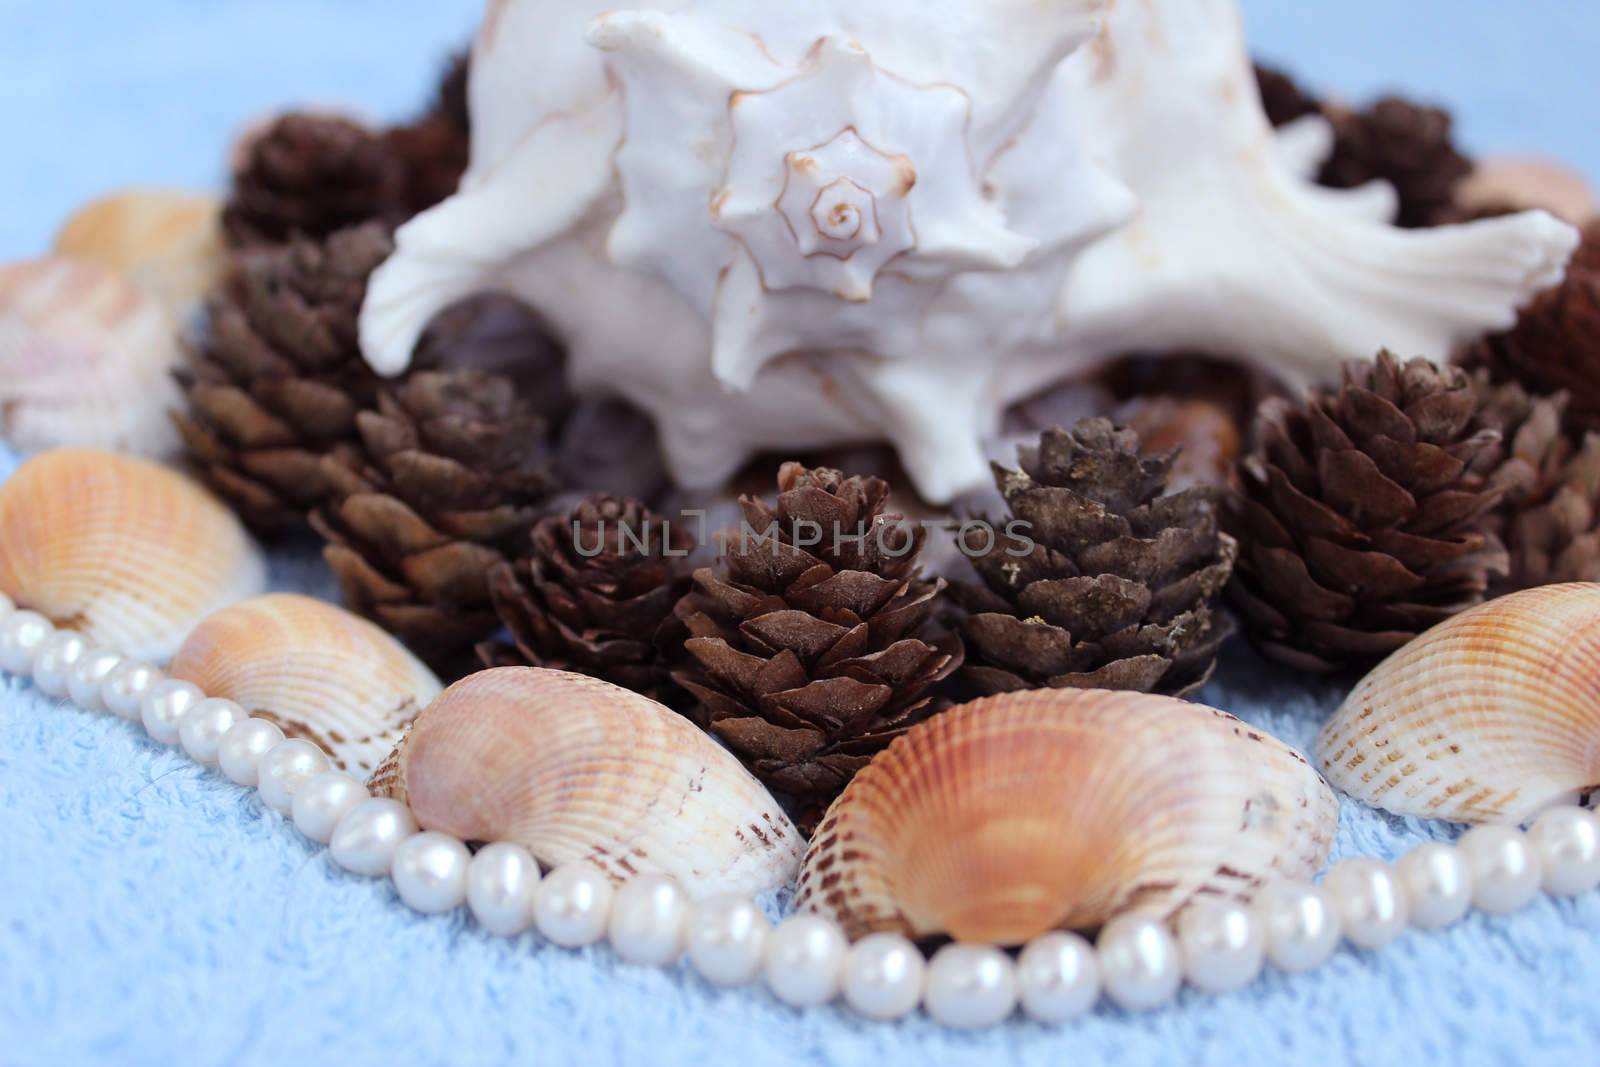 Decoration of Shell (Murex ramosus), shells of snails found in the Gatchina park, pearl beads, pine cones from Karelia and seashells from Arabian Sea.